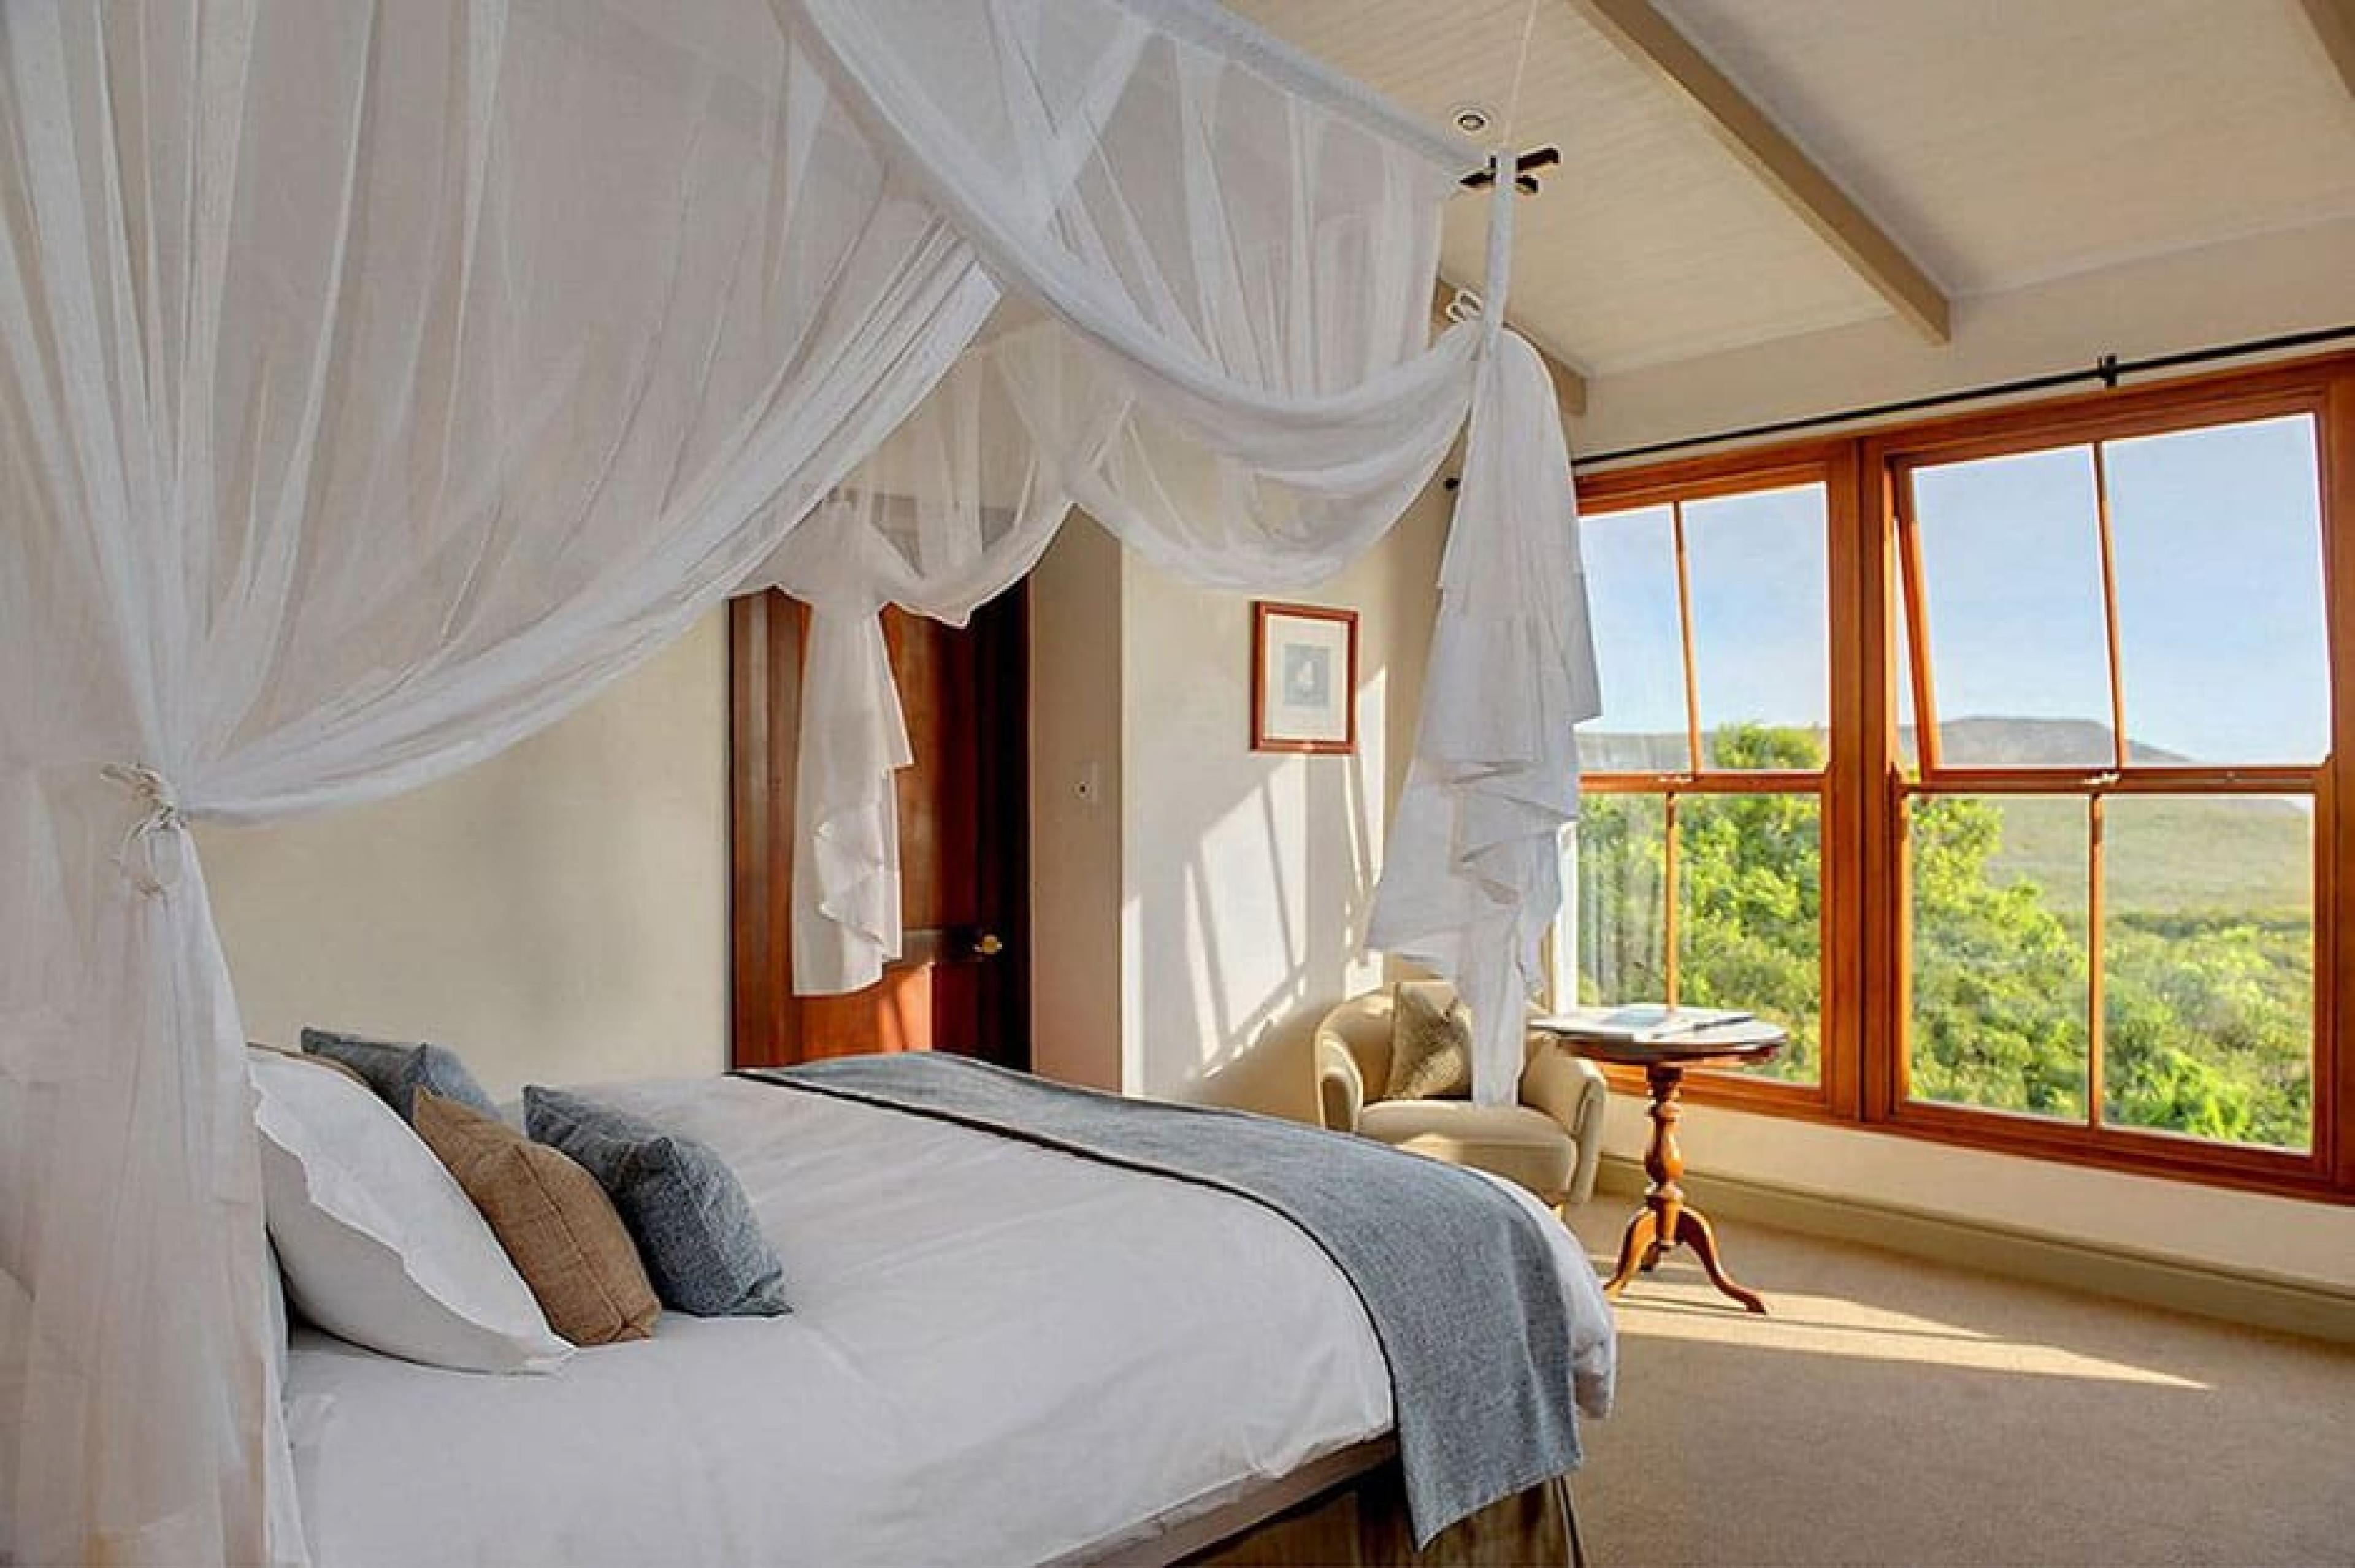 Bedroom at Grootbos Private Nature Reserve, South Africa